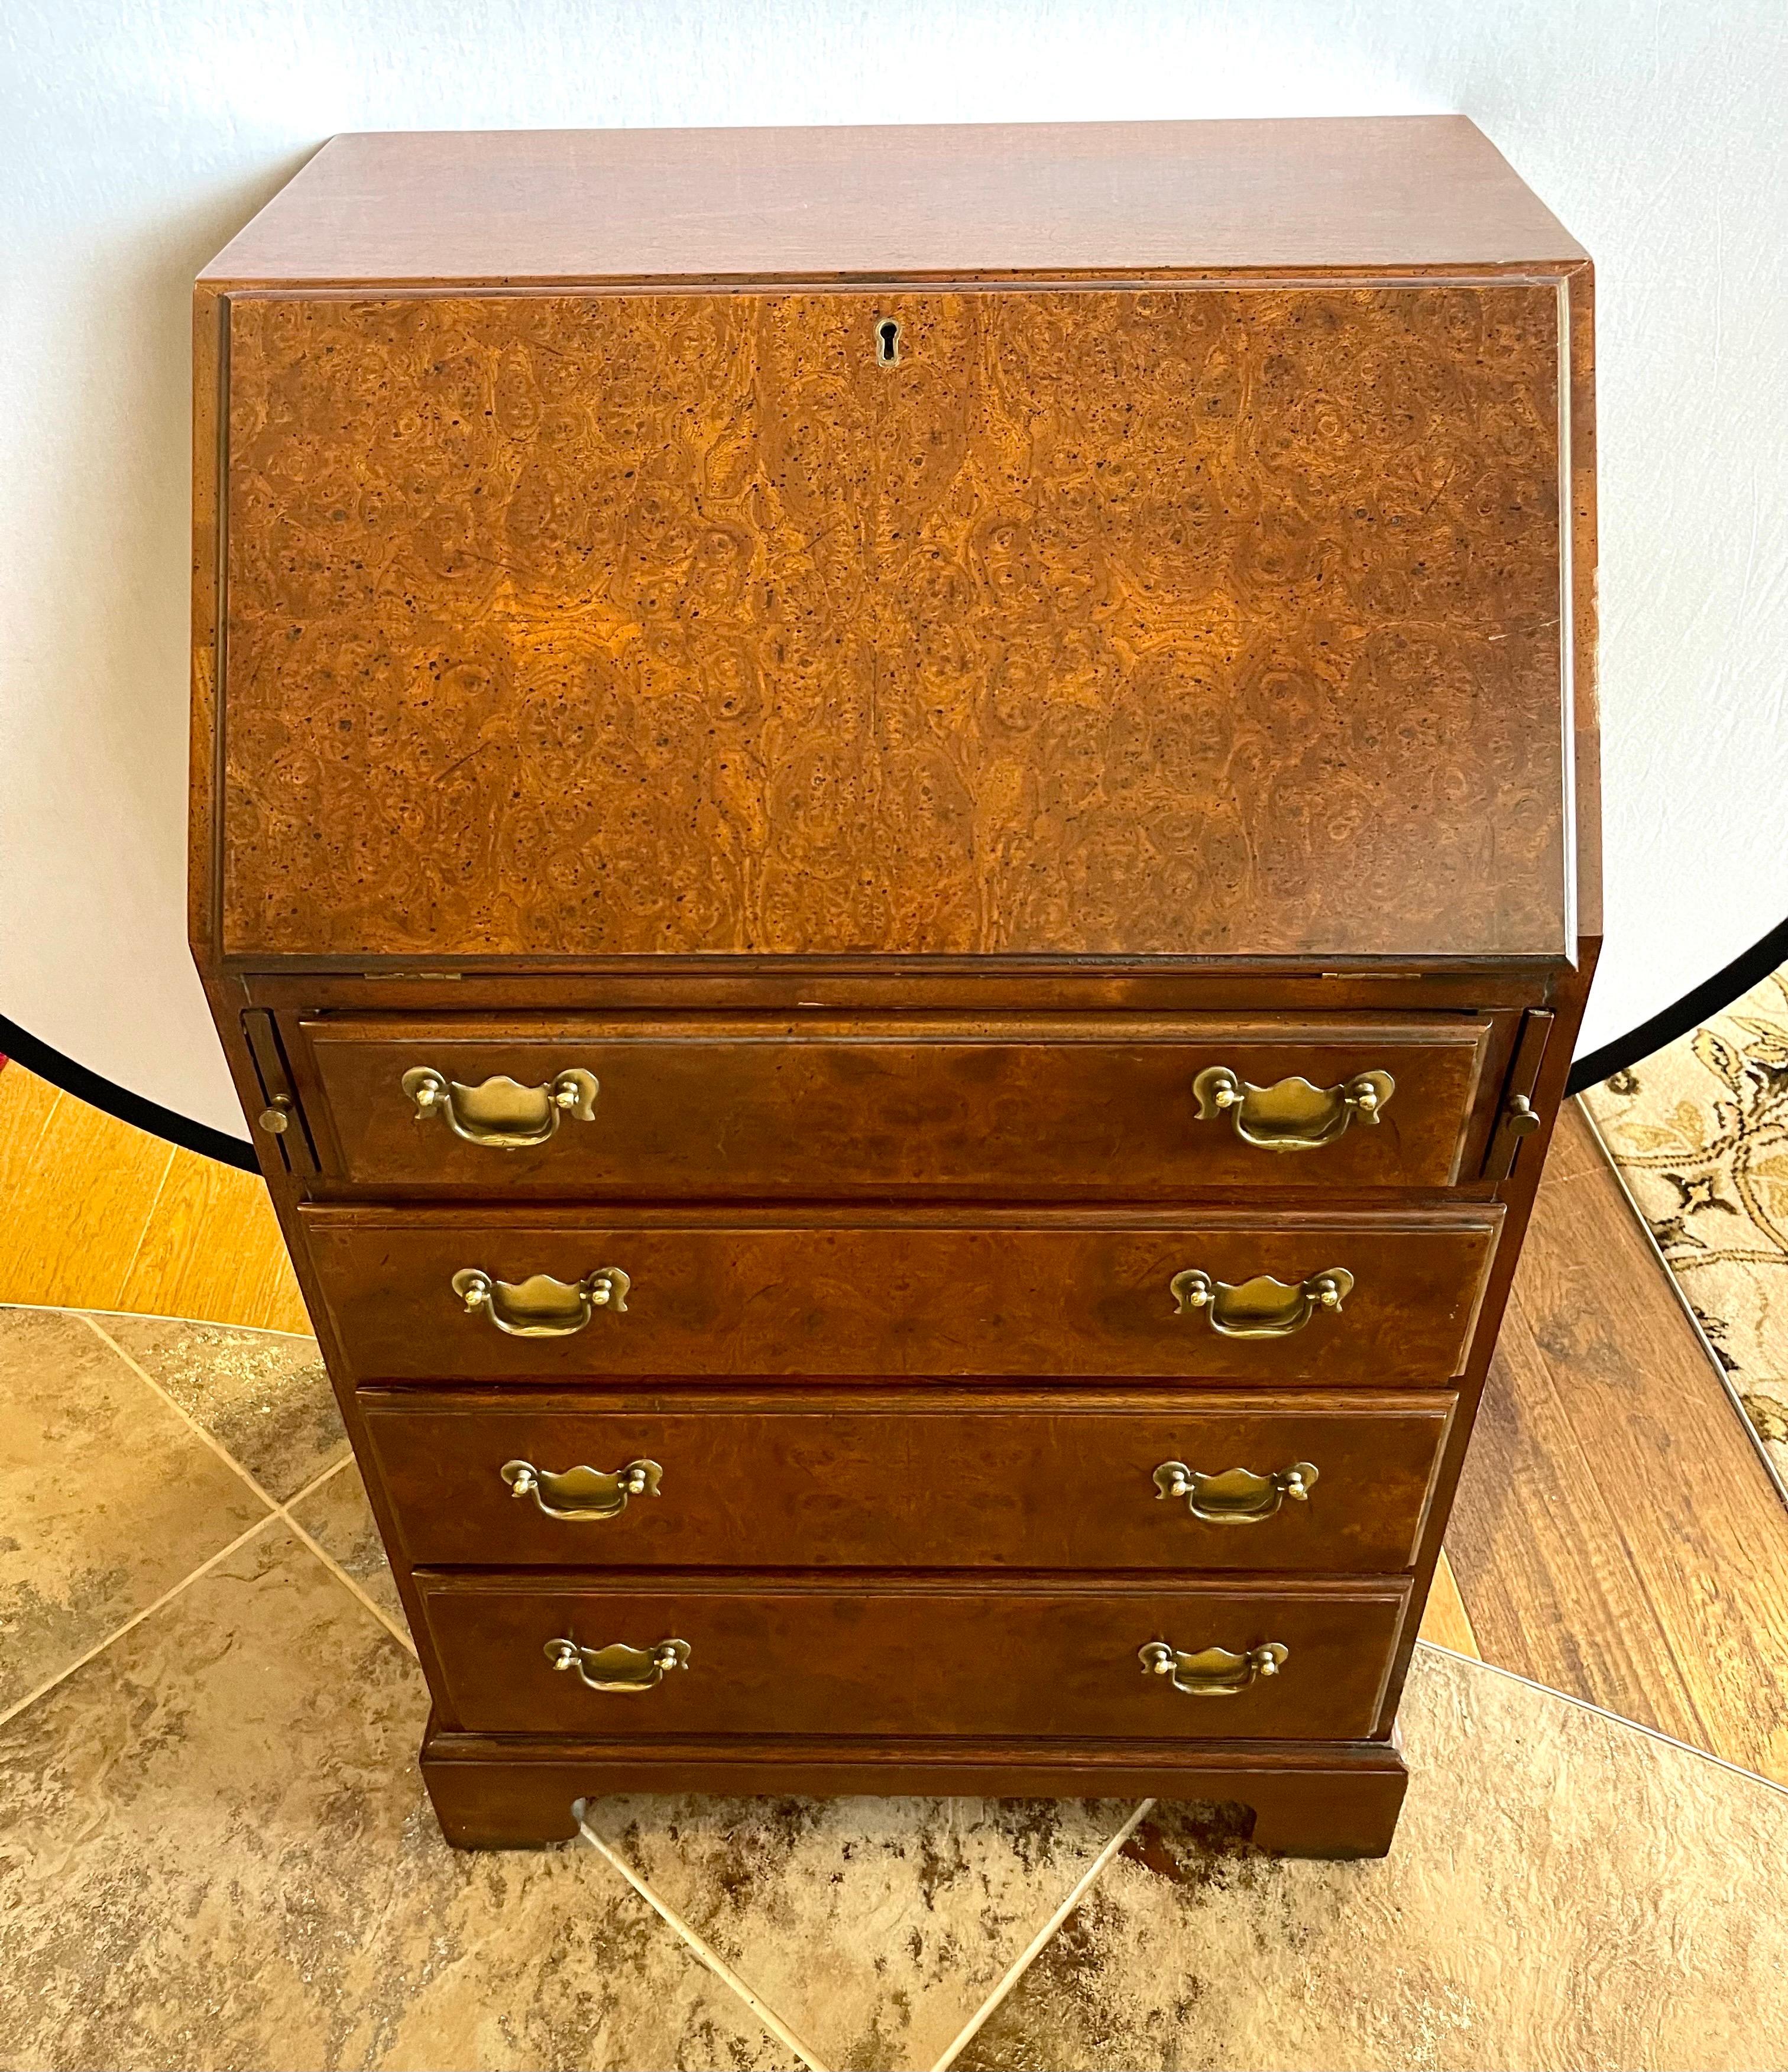 Elegant and small in size, a traditional burl walnut secretary desk. Features a drop down writing surface and multiple drawers and cubbies. Bottom portion has four dovetailed drawers with brass pulls. Perfect for a smaller space.